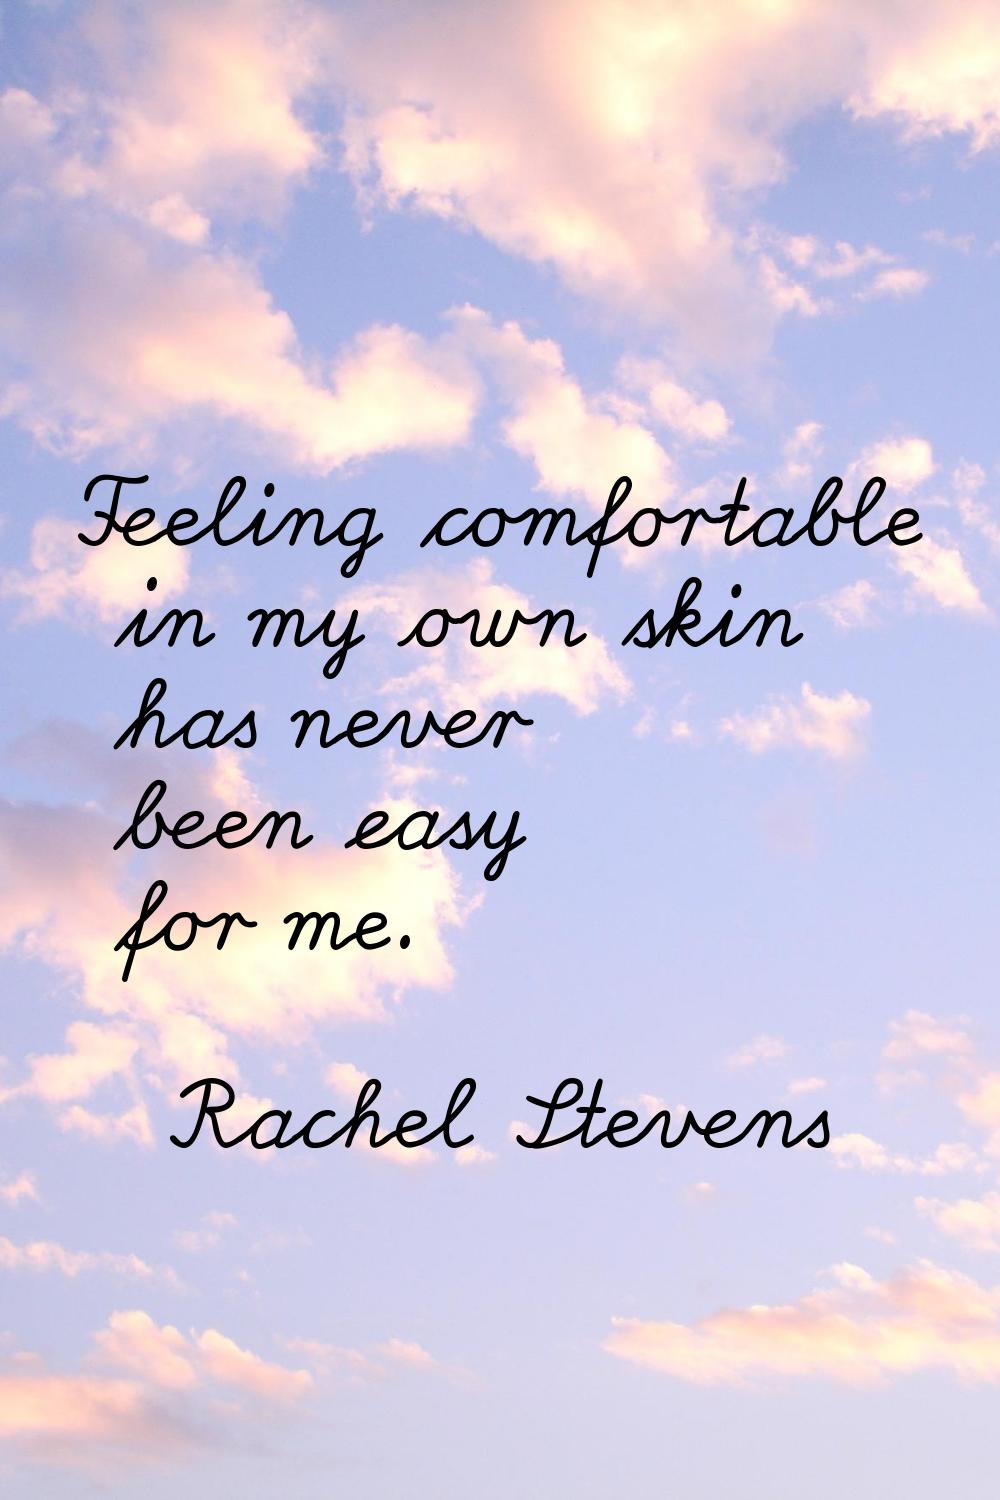 Feeling comfortable in my own skin has never been easy for me.